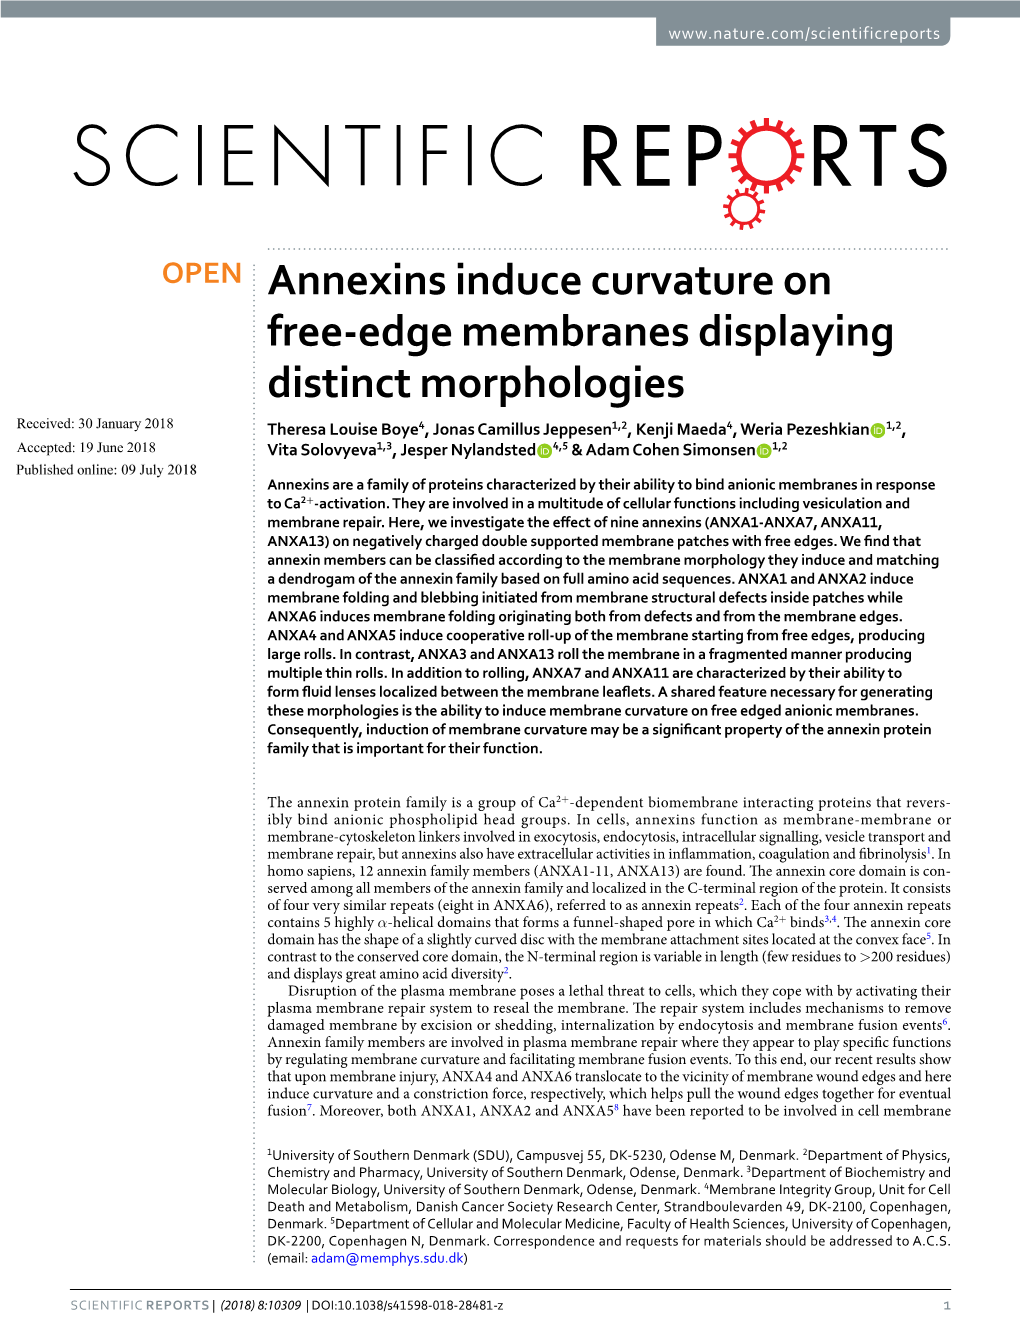 Annexins Induce Curvature on Free-Edge Membranes Displaying Distinct Morphologies